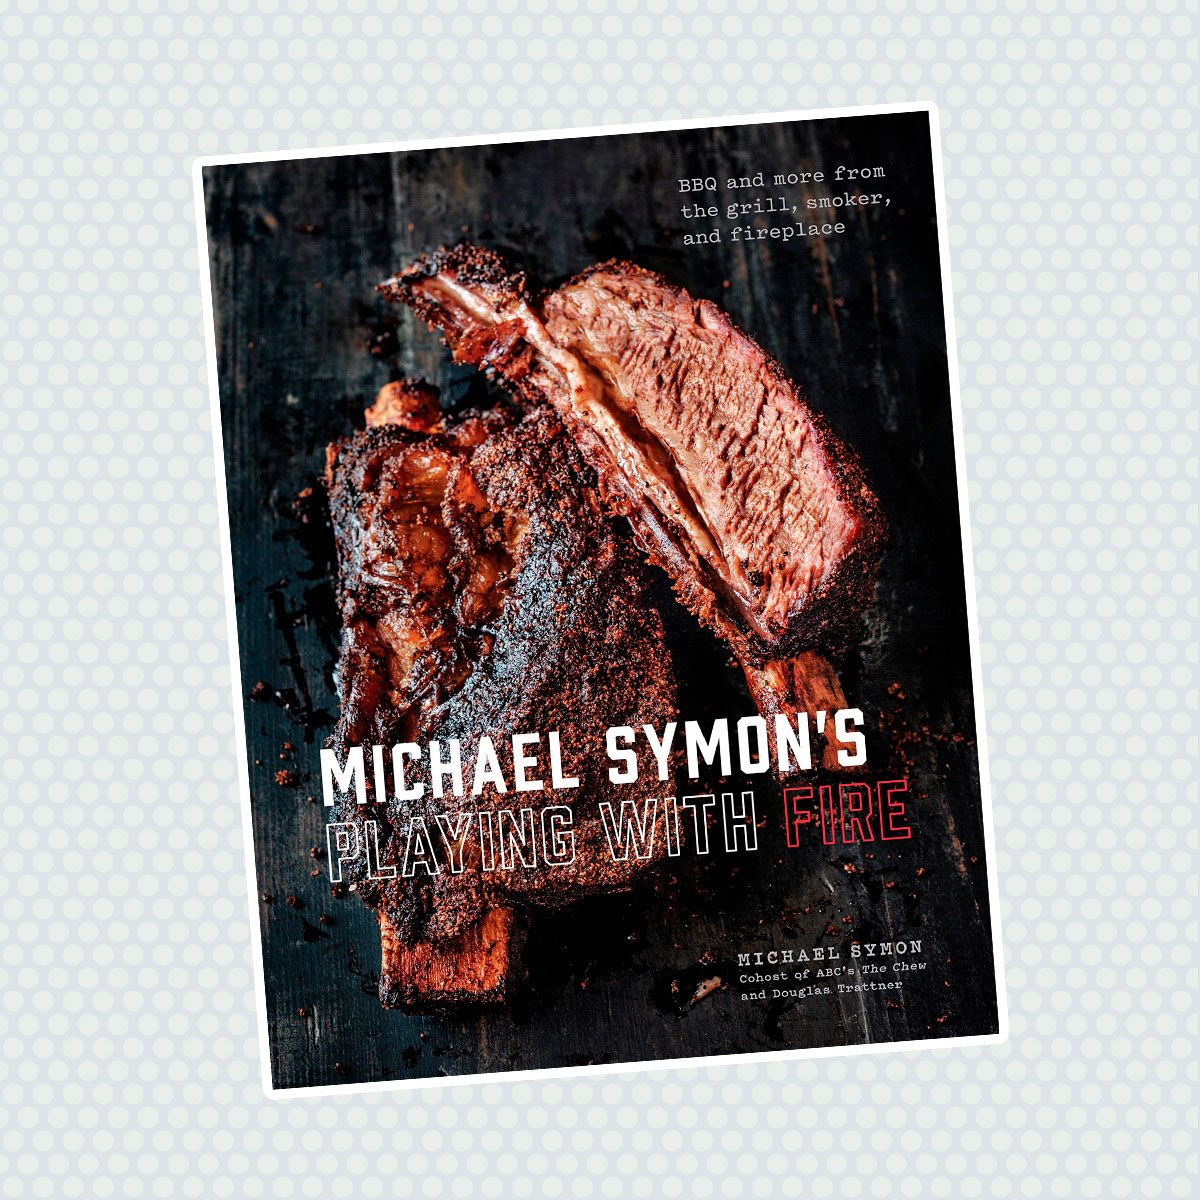 Michael Symon's Playing with Fire: BBQ and More from the Grill, Smoker and Fireplace